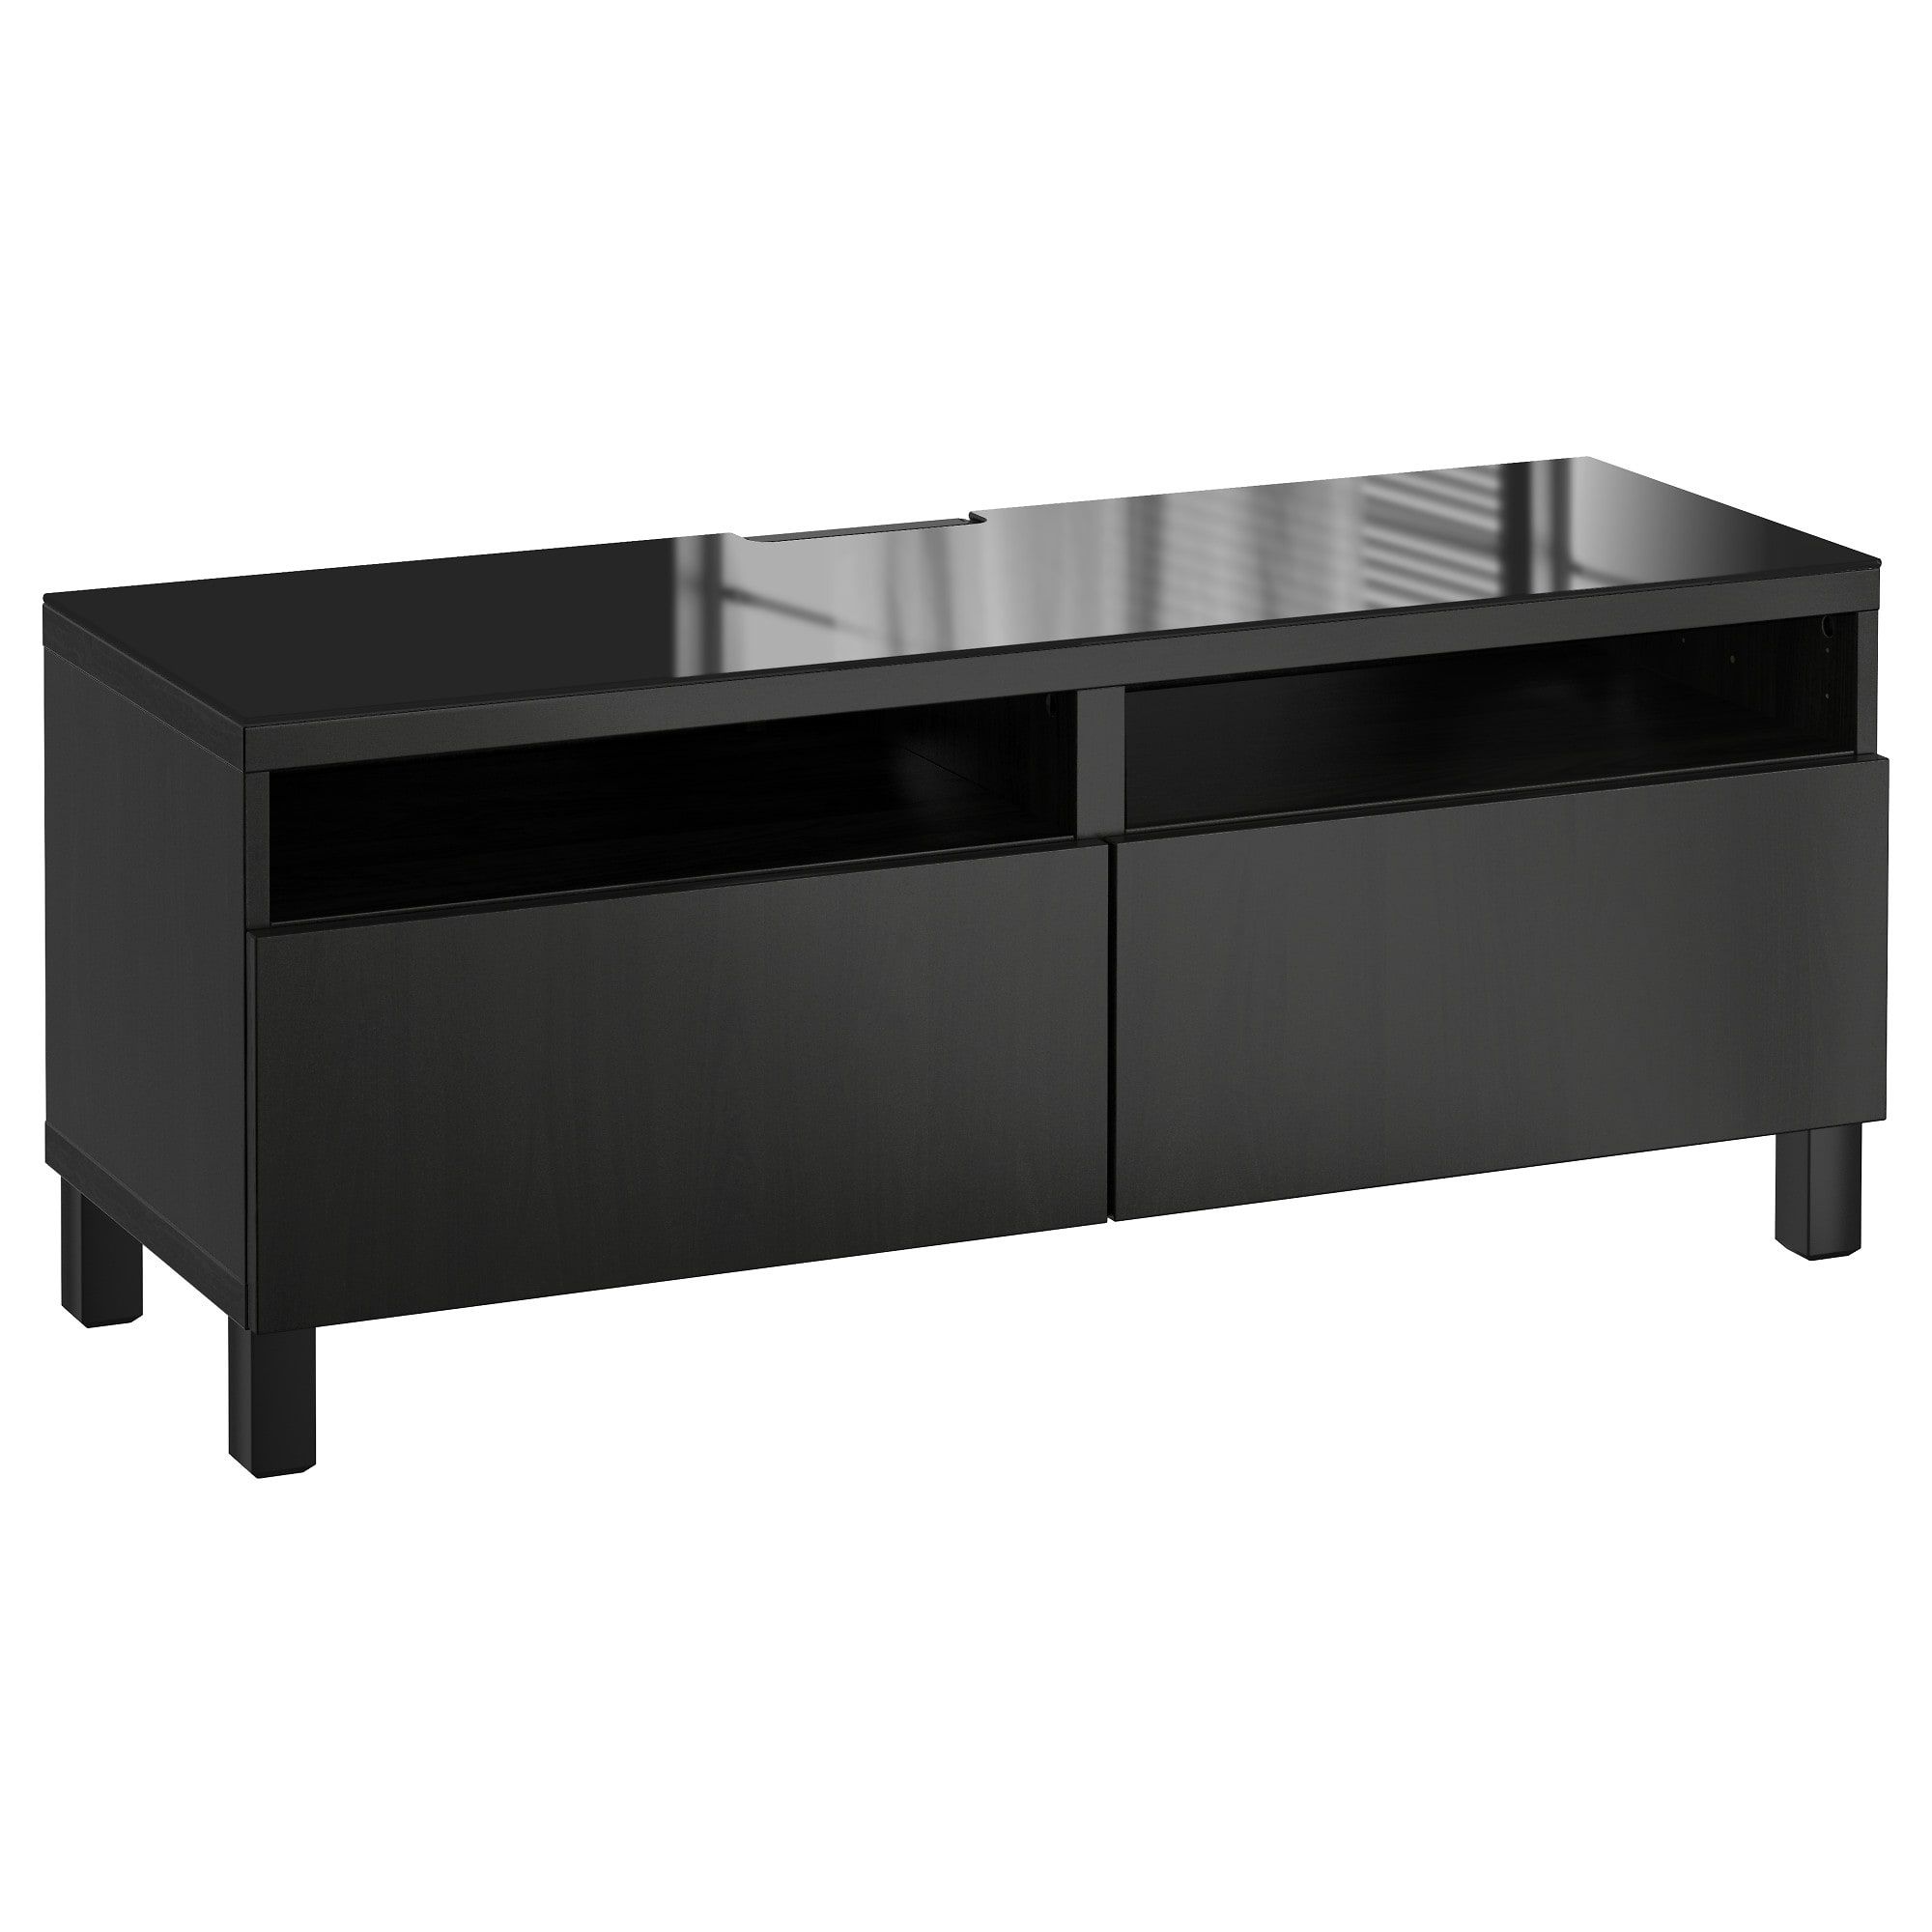 Newest Tv Drawer Units Intended For Tv Stands & Tv Units (View 13 of 20)